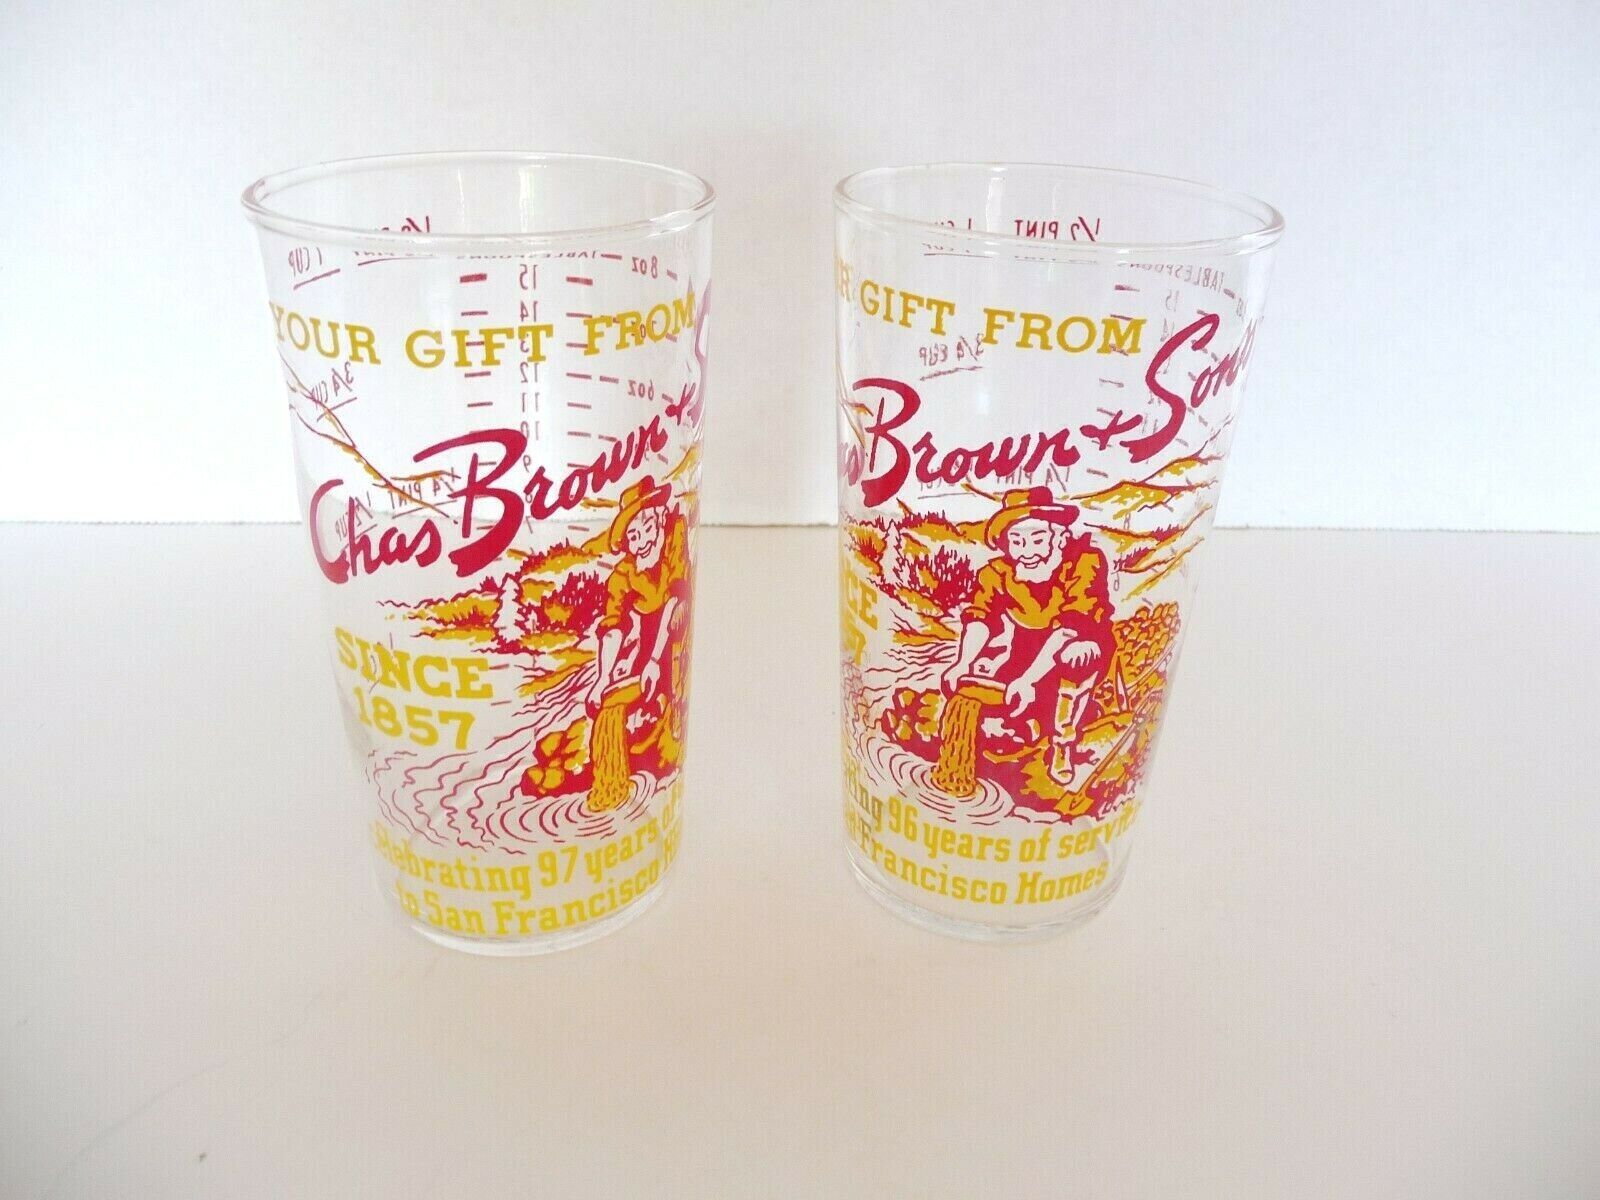 2 Advertising Measuring Glass Tumblers Chas Brown & Sons San Francisco 1953 Chas Brown